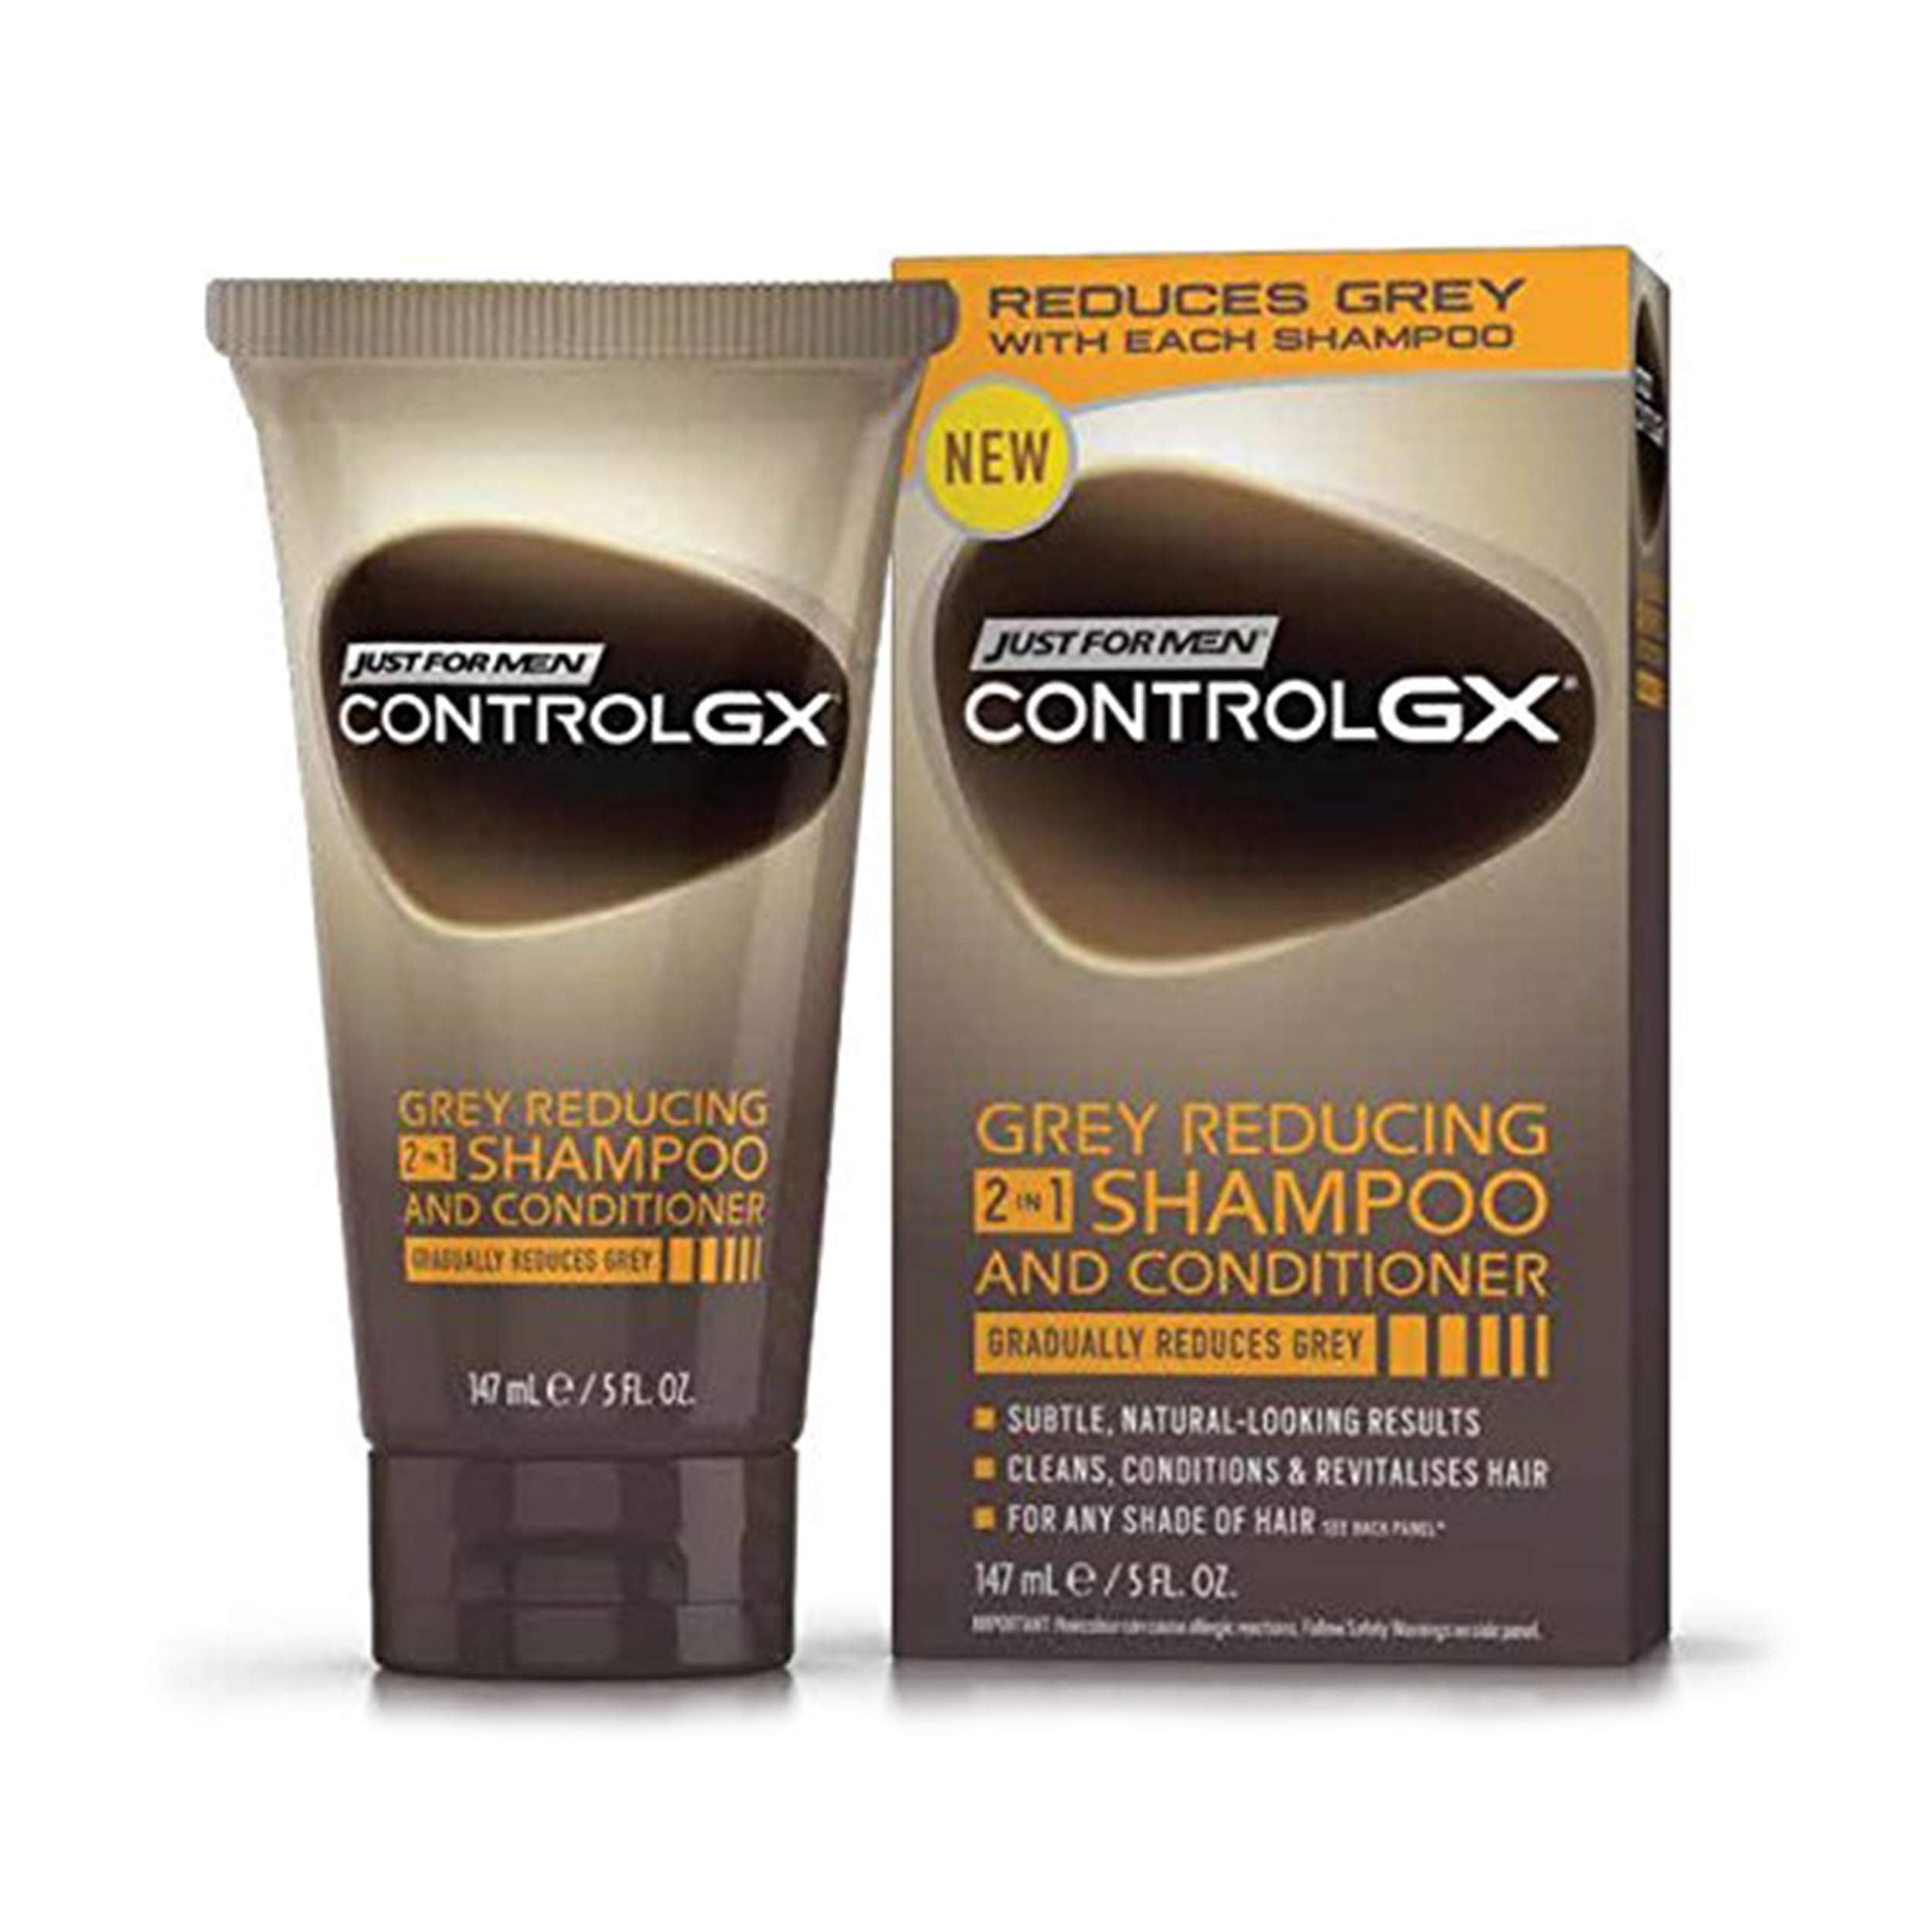 Just for men Control GX, Grey Reducing 2-in-1 Shampoo & Conditioner for Grey Hair – All Shades, 147 ml